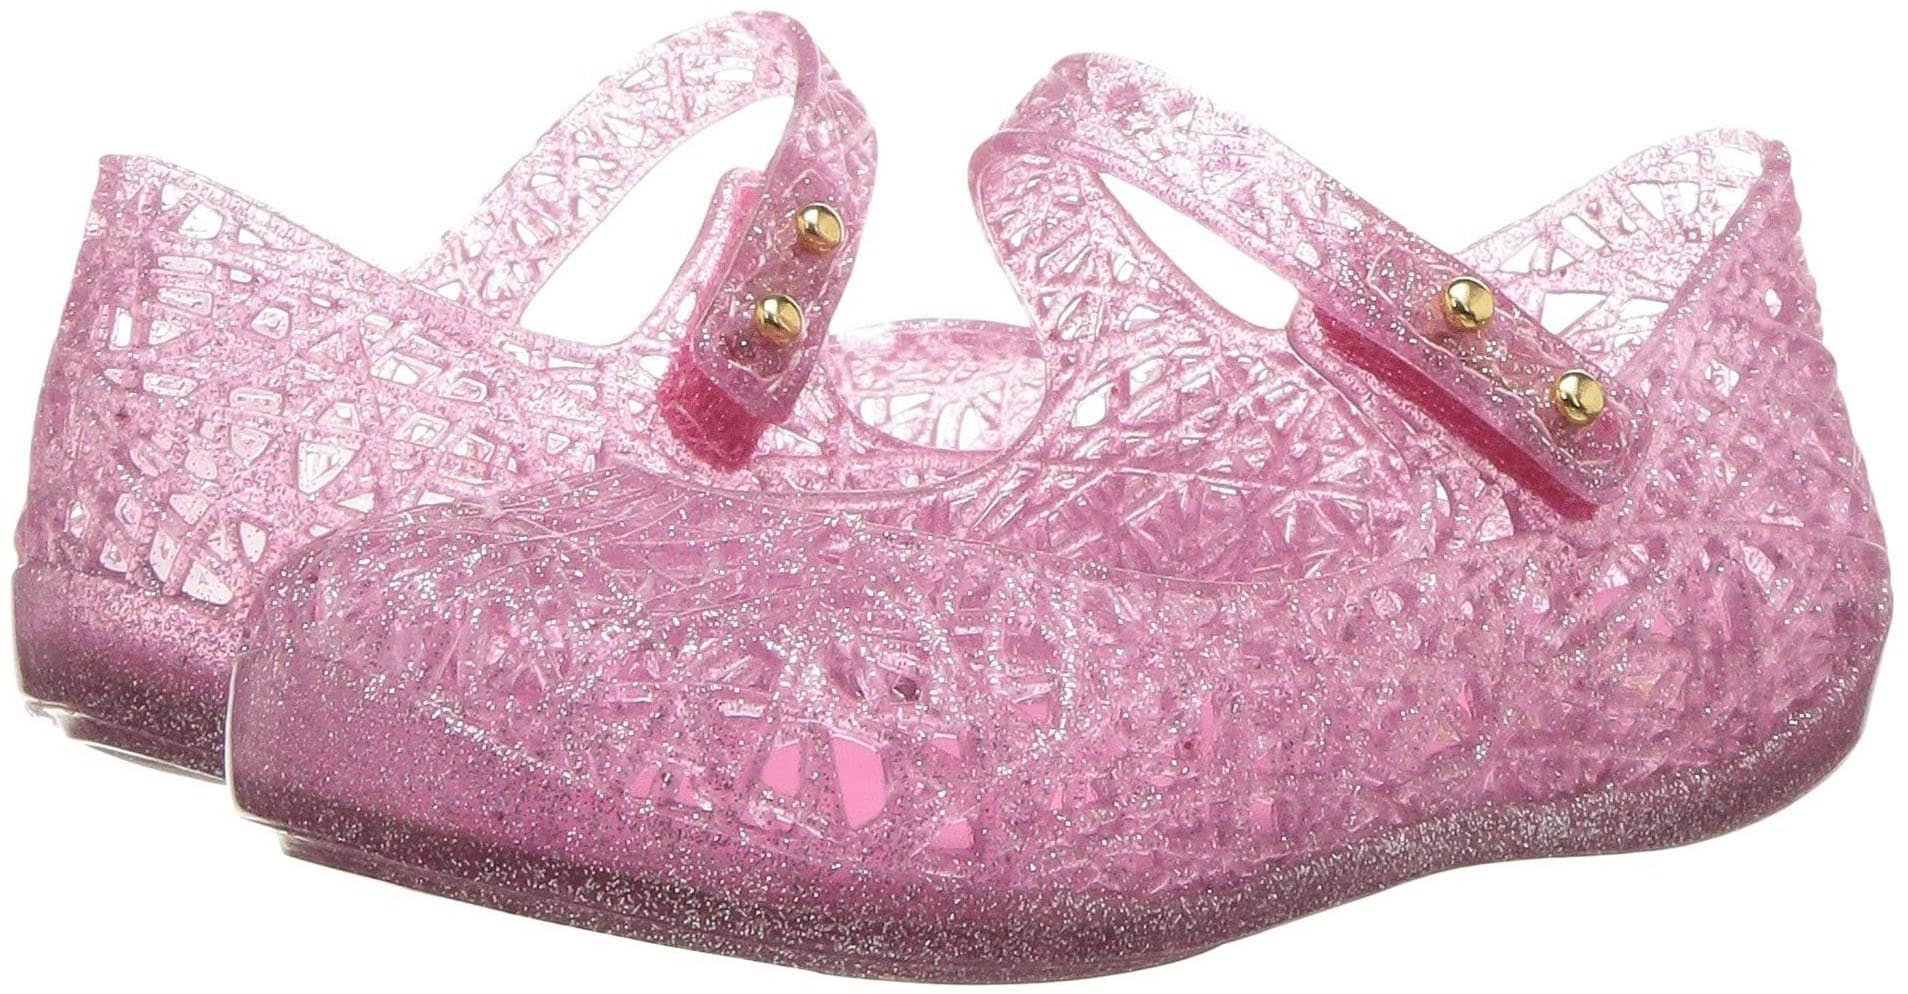 Toddlers will love the cute and comfy Melissa Mini Campana VI jelly shoes in girly pink color